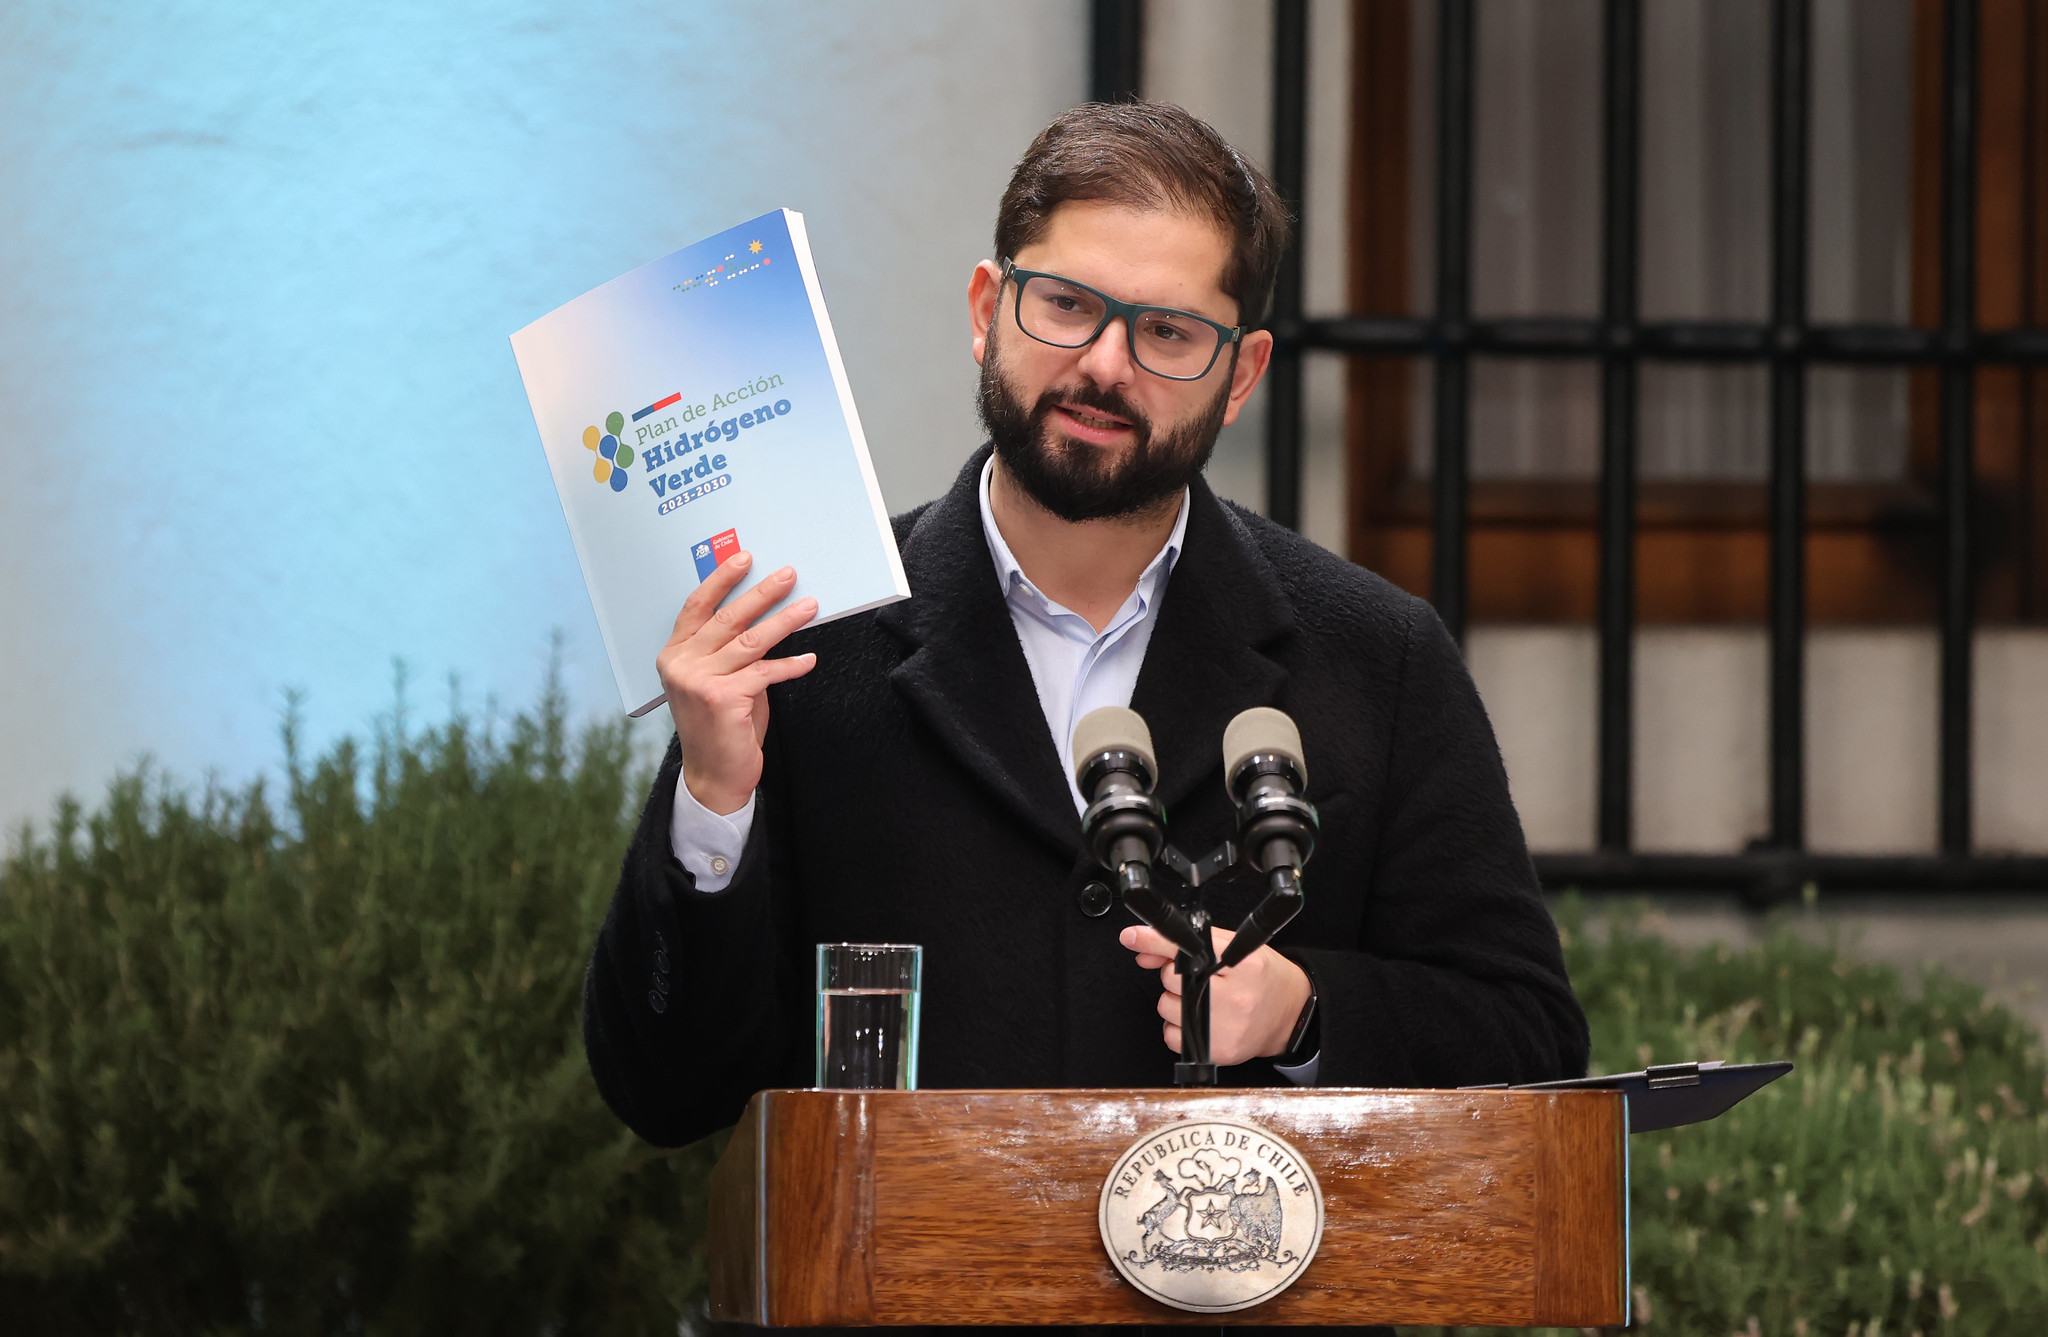 <p>On 2 May, President Gabriel Boric launched Chile’s Green Hydrogen Action Plan. The new strategy set a goal for the country to produce the world’s cheapest green hydrogen by 2030. (Image: <a href="https://flic.kr/p/2pNPfzU">Rodrigo Saenz</a> / <a href="https://flickr.com/people/ministeriodeobraspublicas/">Ministerio de Obras Públicas de Chile</a>, <a href="https://creativecommons.org/licenses/by-nc-sa/2.0/">CC BY-NC-SA</a>)</p>